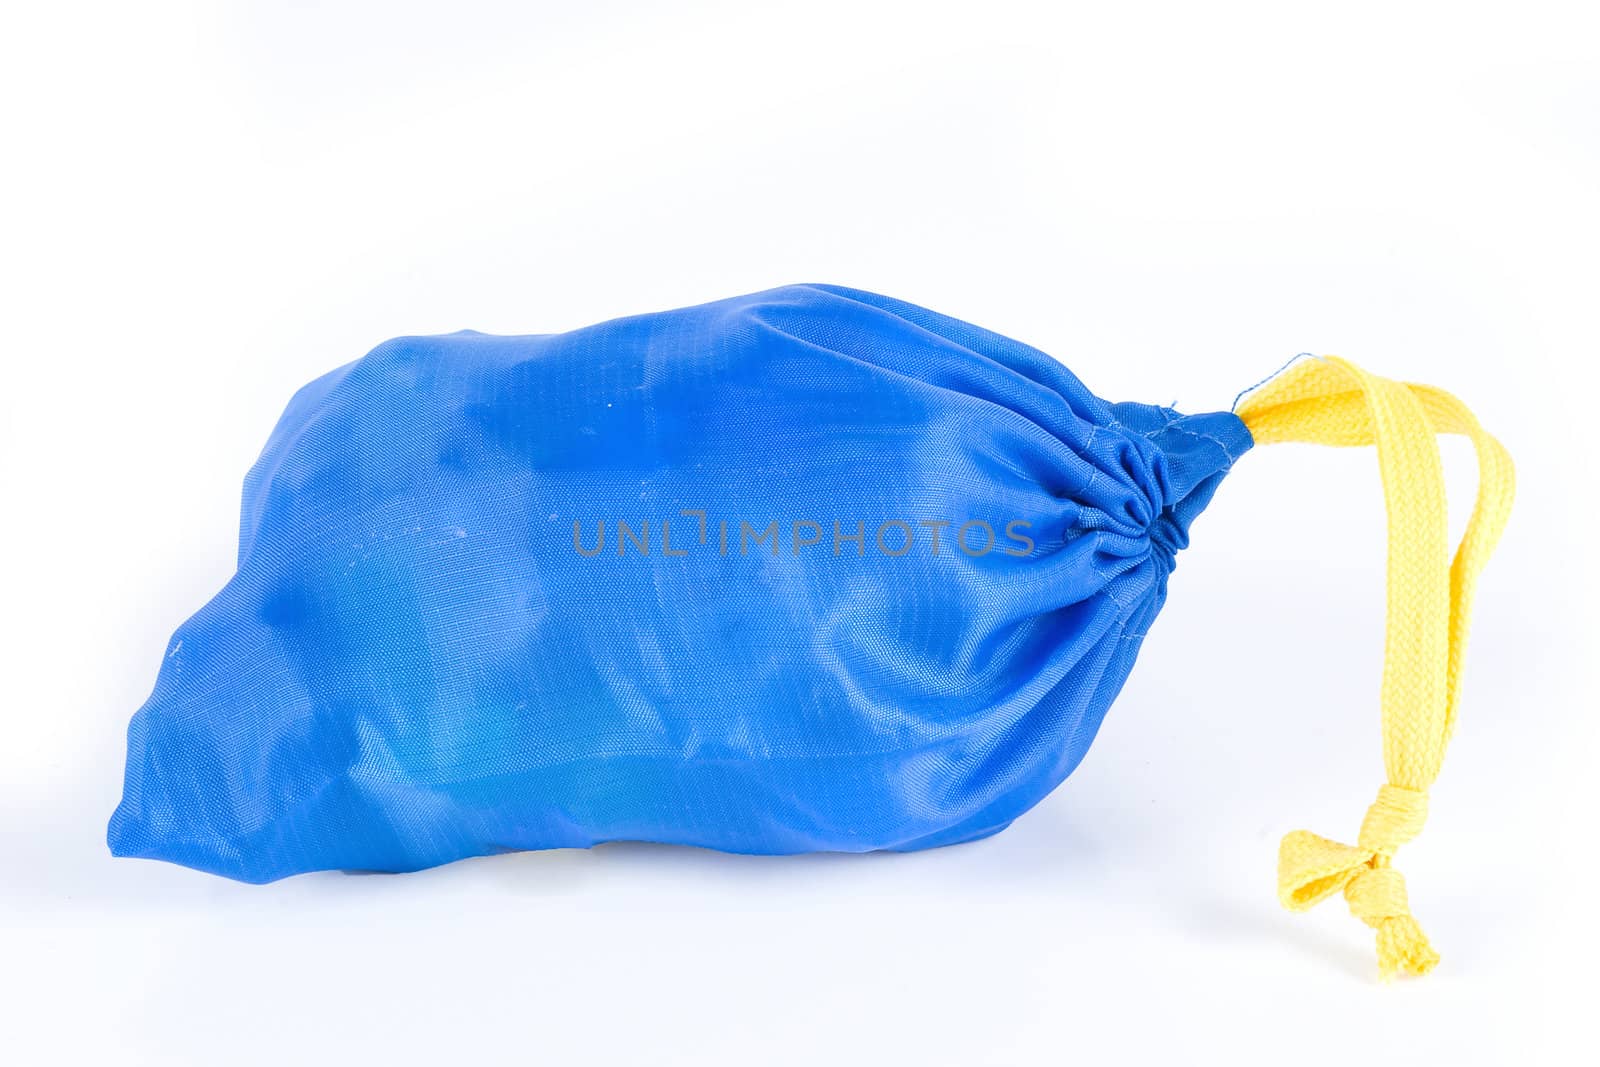 a blue bag with a yellow drawstring